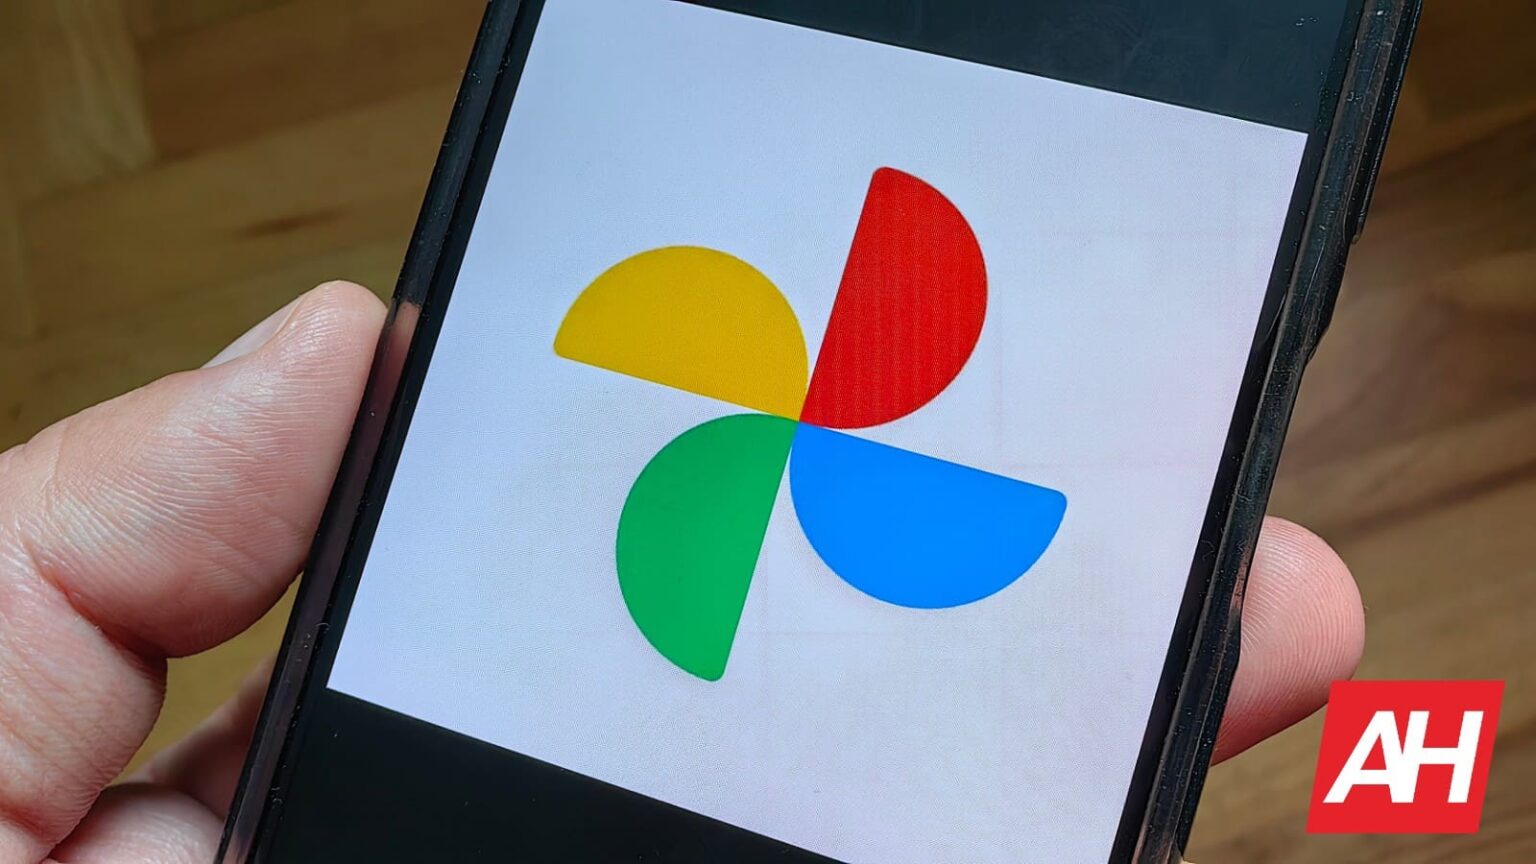 Google will let you sync your locked folder across devices